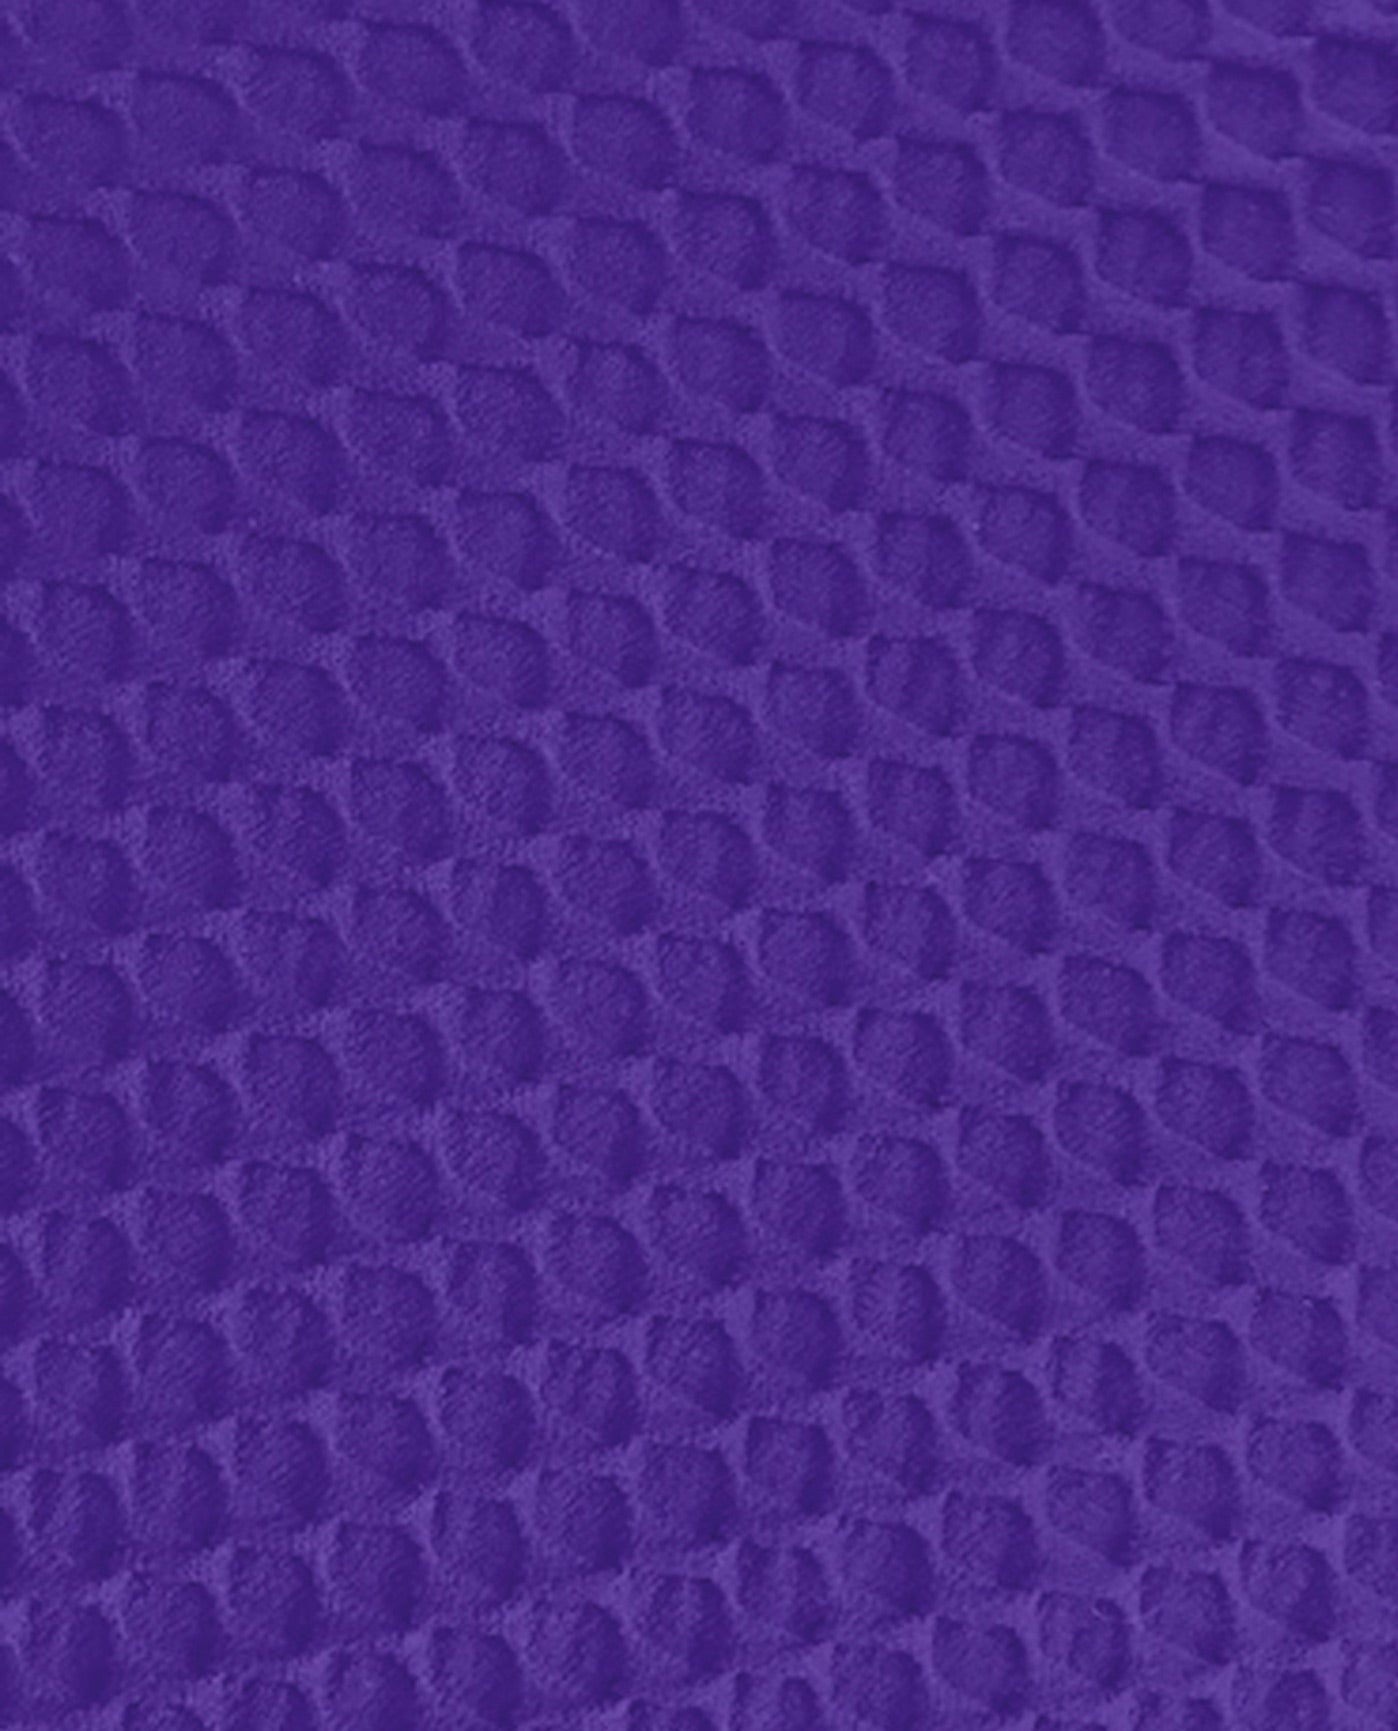 FABRIC SWATCH VIEW OF CHLORINE RESISTANT AQUAMORE COLOR BLOCK TEXTURED SPORTY PLUS SIZE SWIMSUIT | 618L AQT TEXTURED PURPLE